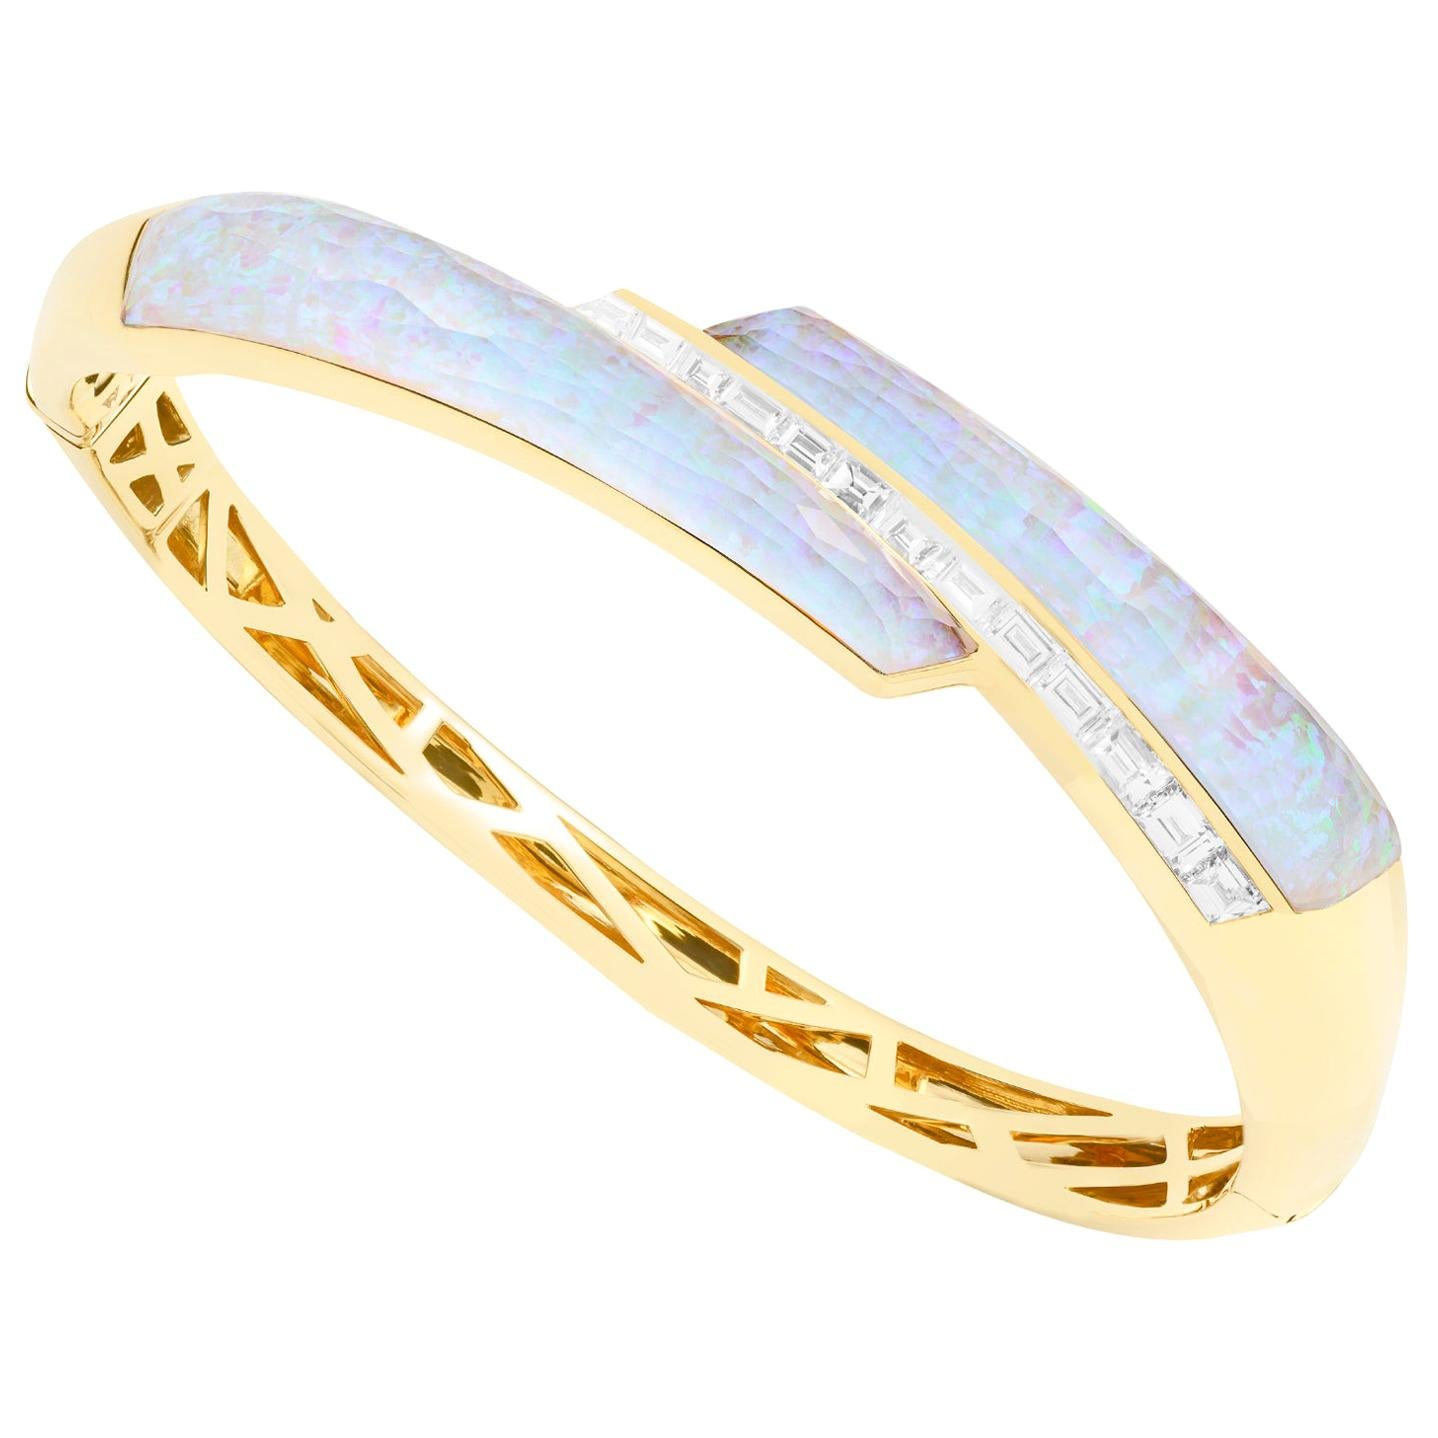 Stephen Webster CH₂ White Opalescent Crystal Haze and Diamonds Shard Bangle